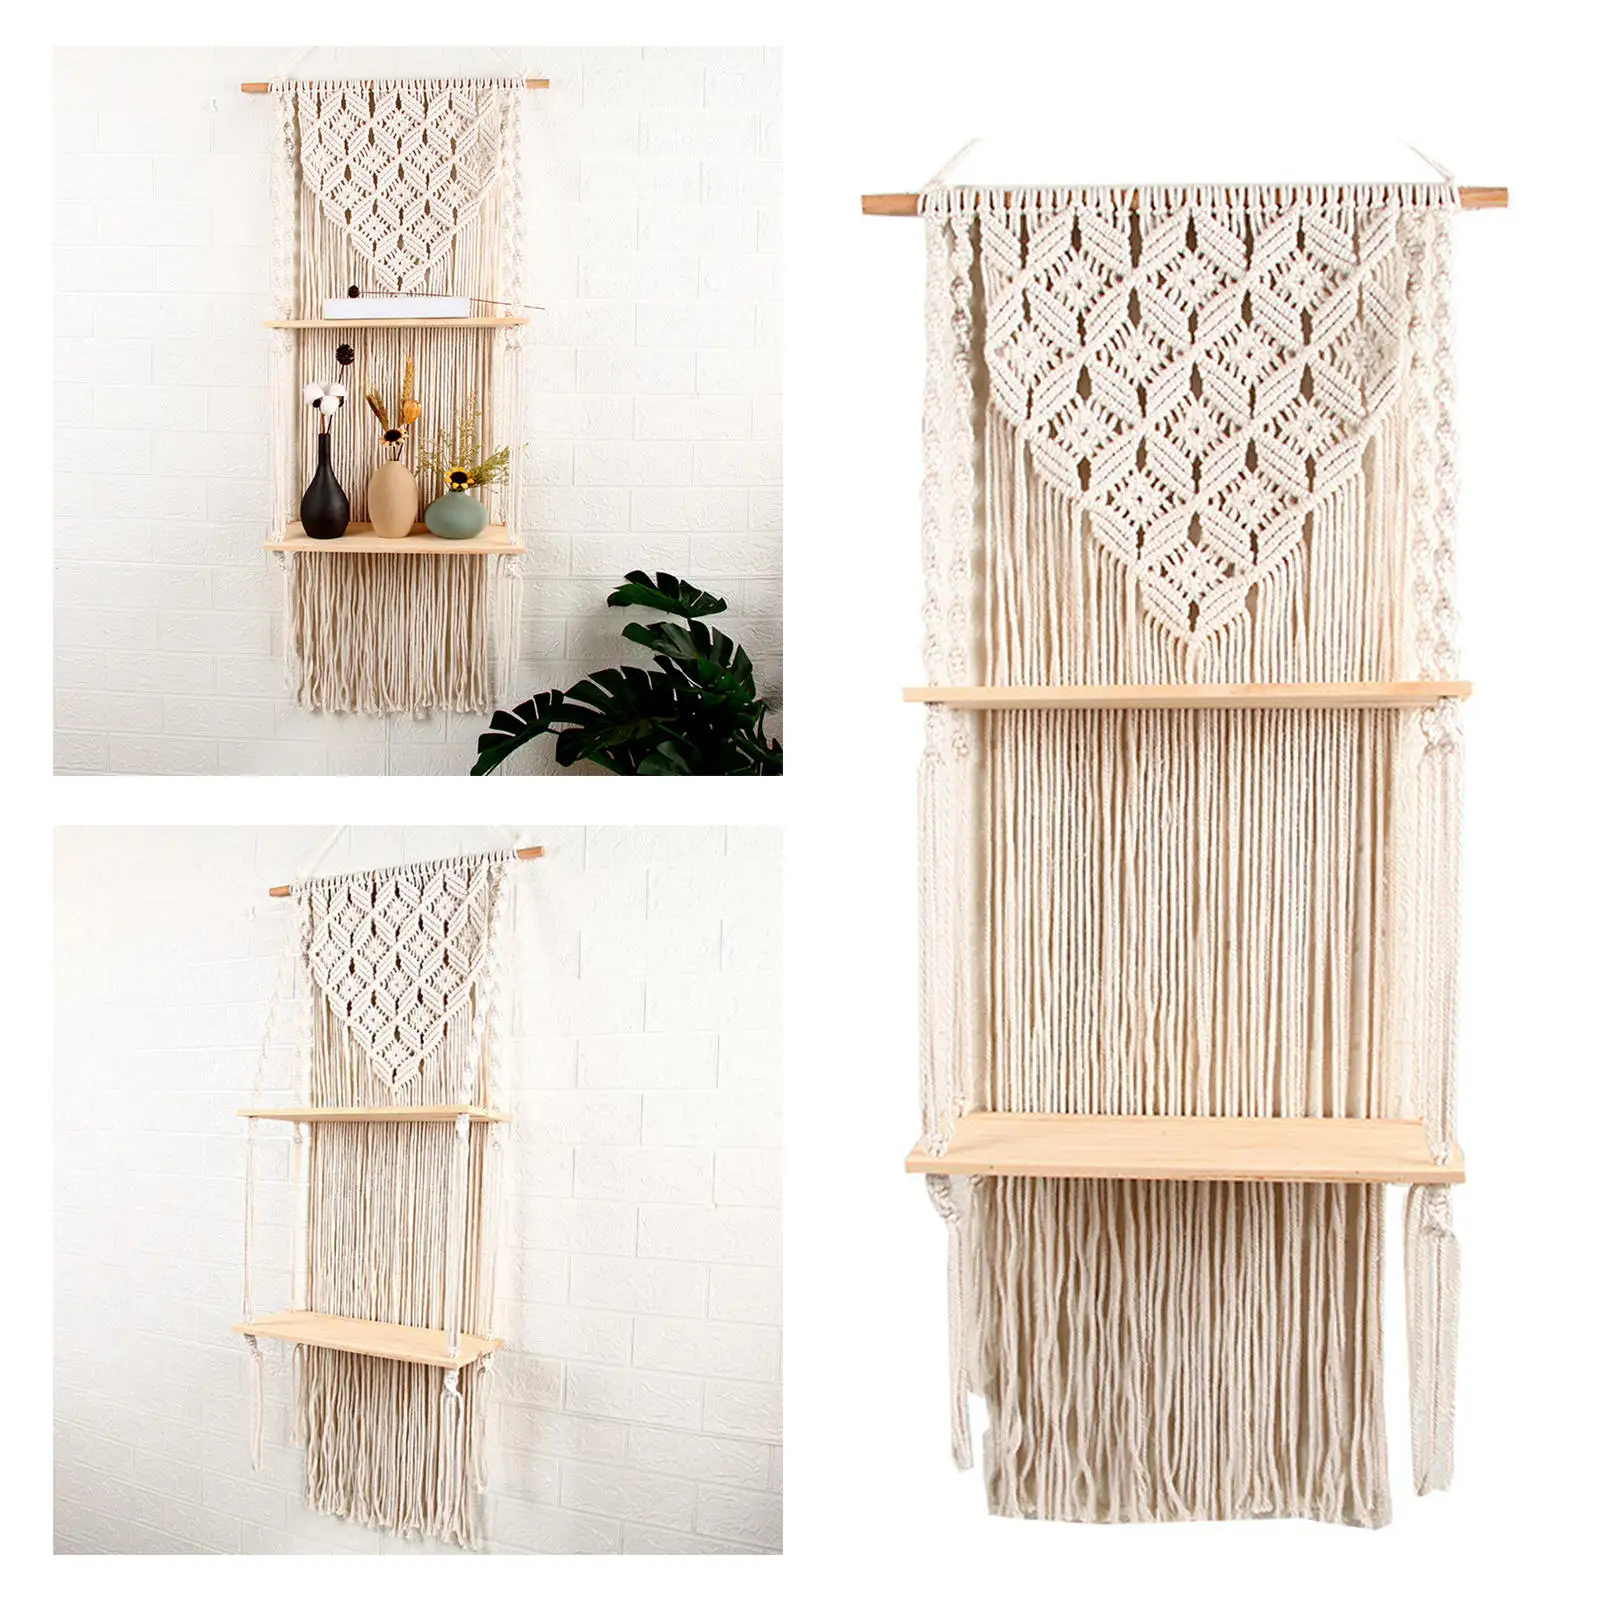 Chic Tapestry Macrame Wall Hanging Shelf Plant Display Home Organizer Books Flowerpot Woven Wood Shelf 2 Tiers Decor for Kitchen